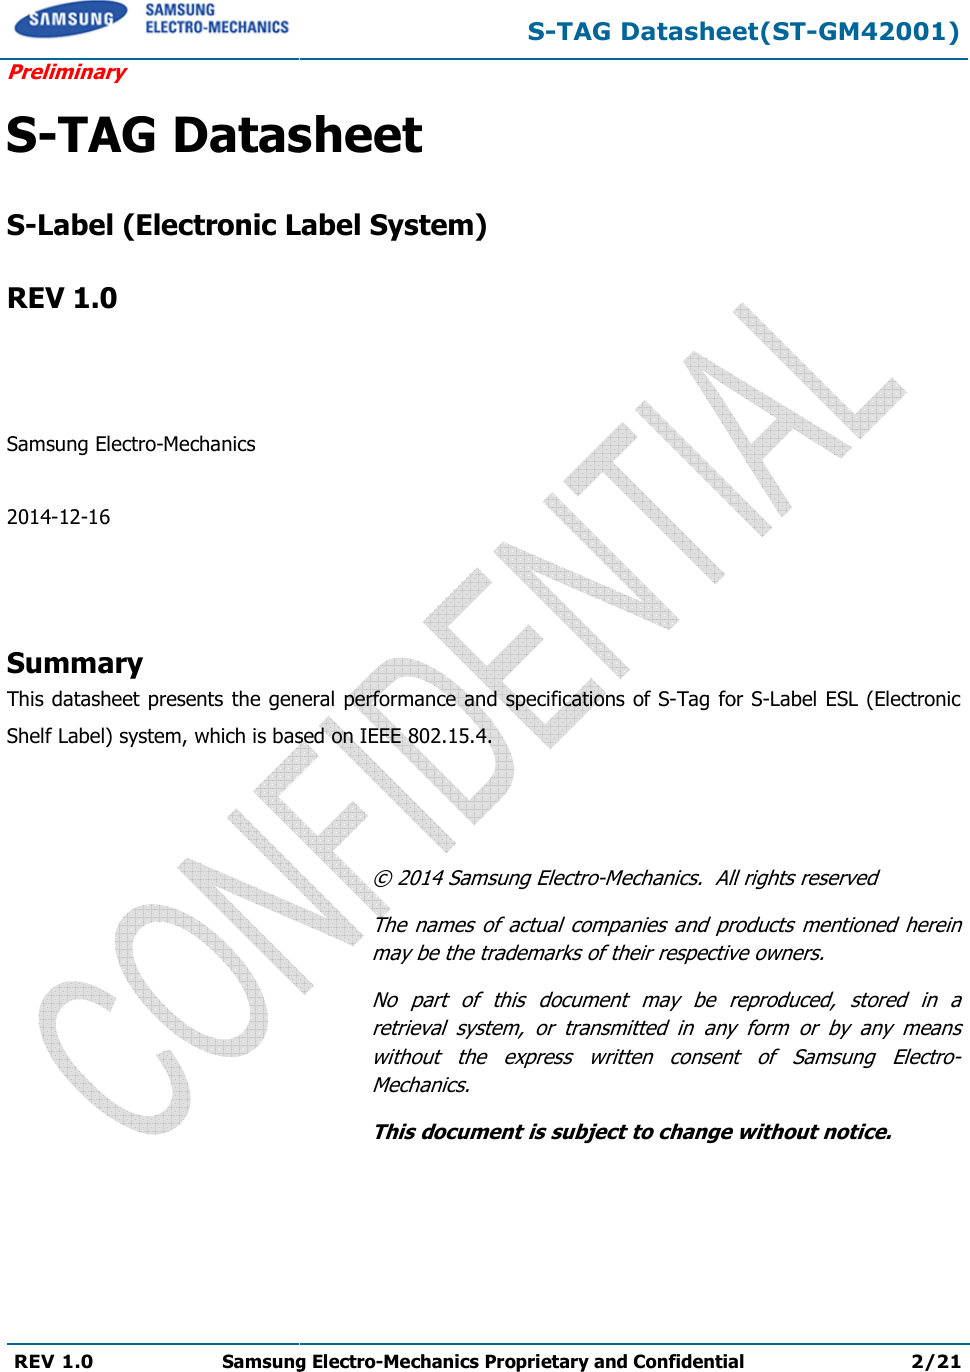  Preliminary REV 1.0 Samsung Electro  S-TAG Datasheet S-Label (Electronic Label System) REV 1.0    Samsung Electro-Mechanics  2014-12-16    Summary This datasheet presents the general performance and specifications of Shelf Label) system, which is based on     S-TAG Datasheet(STSamsung Electro-Mechanics Proprietary and ConfidentialDatasheet  Label (Electronic Label System) general performance and specifications of S-Tag for based on IEEE 802.15.4. © 2014 Samsung Electro-Mechanics.  All rights reservedThe names  of  actual  companies and products  mentioned herein may be the trademarks of their respective owners.No  part  of  this  document  may  be  reproduced,  stored  in  a retrieval  system,  or  transmitted  in  any  form  or  by  any  means without  the  express  written  consent  of  Samsung  ElectroMechanics. This document is subject to change without notice.TAG Datasheet(ST-GM42001) Proprietary and Confidential 2/21 for S-Label ESL (Electronic Mechanics.  All rights reserved and products  mentioned  herein may be the trademarks of their respective owners. No  part  of  this  document  may  be  reproduced,  stored  in  a retrieval  system,  or  transmitted  in  any  form  or  by  any  means without  the  express  written  consent  of  Samsung  Electro-This document is subject to change without notice. 